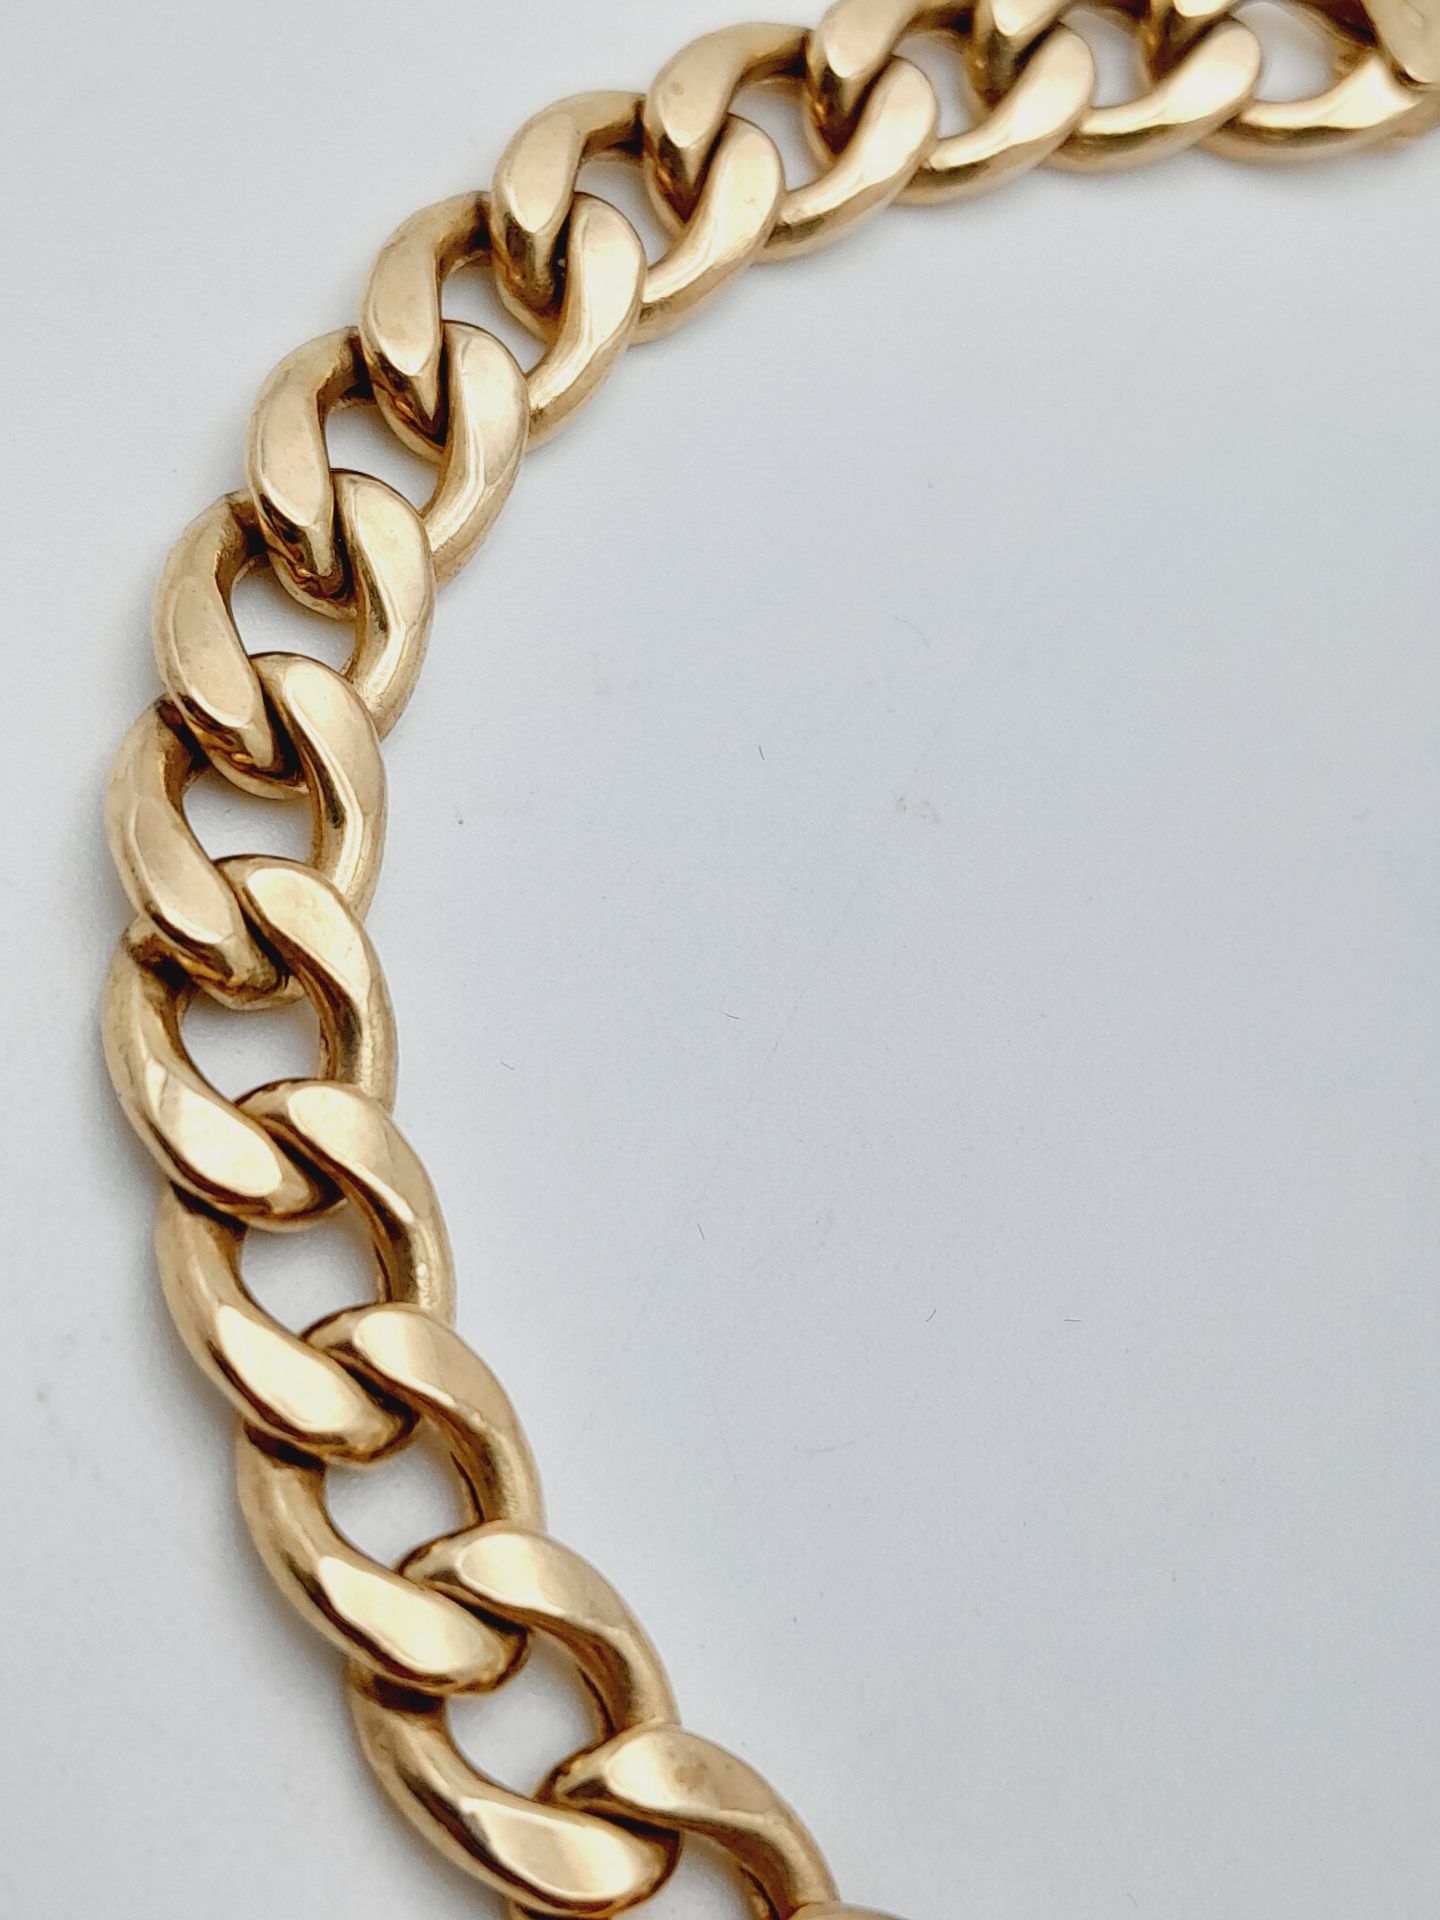 A 9K Yellow Gold Flat Curb Link Bracelet. 19cm. 6.1g weight. - Image 3 of 5